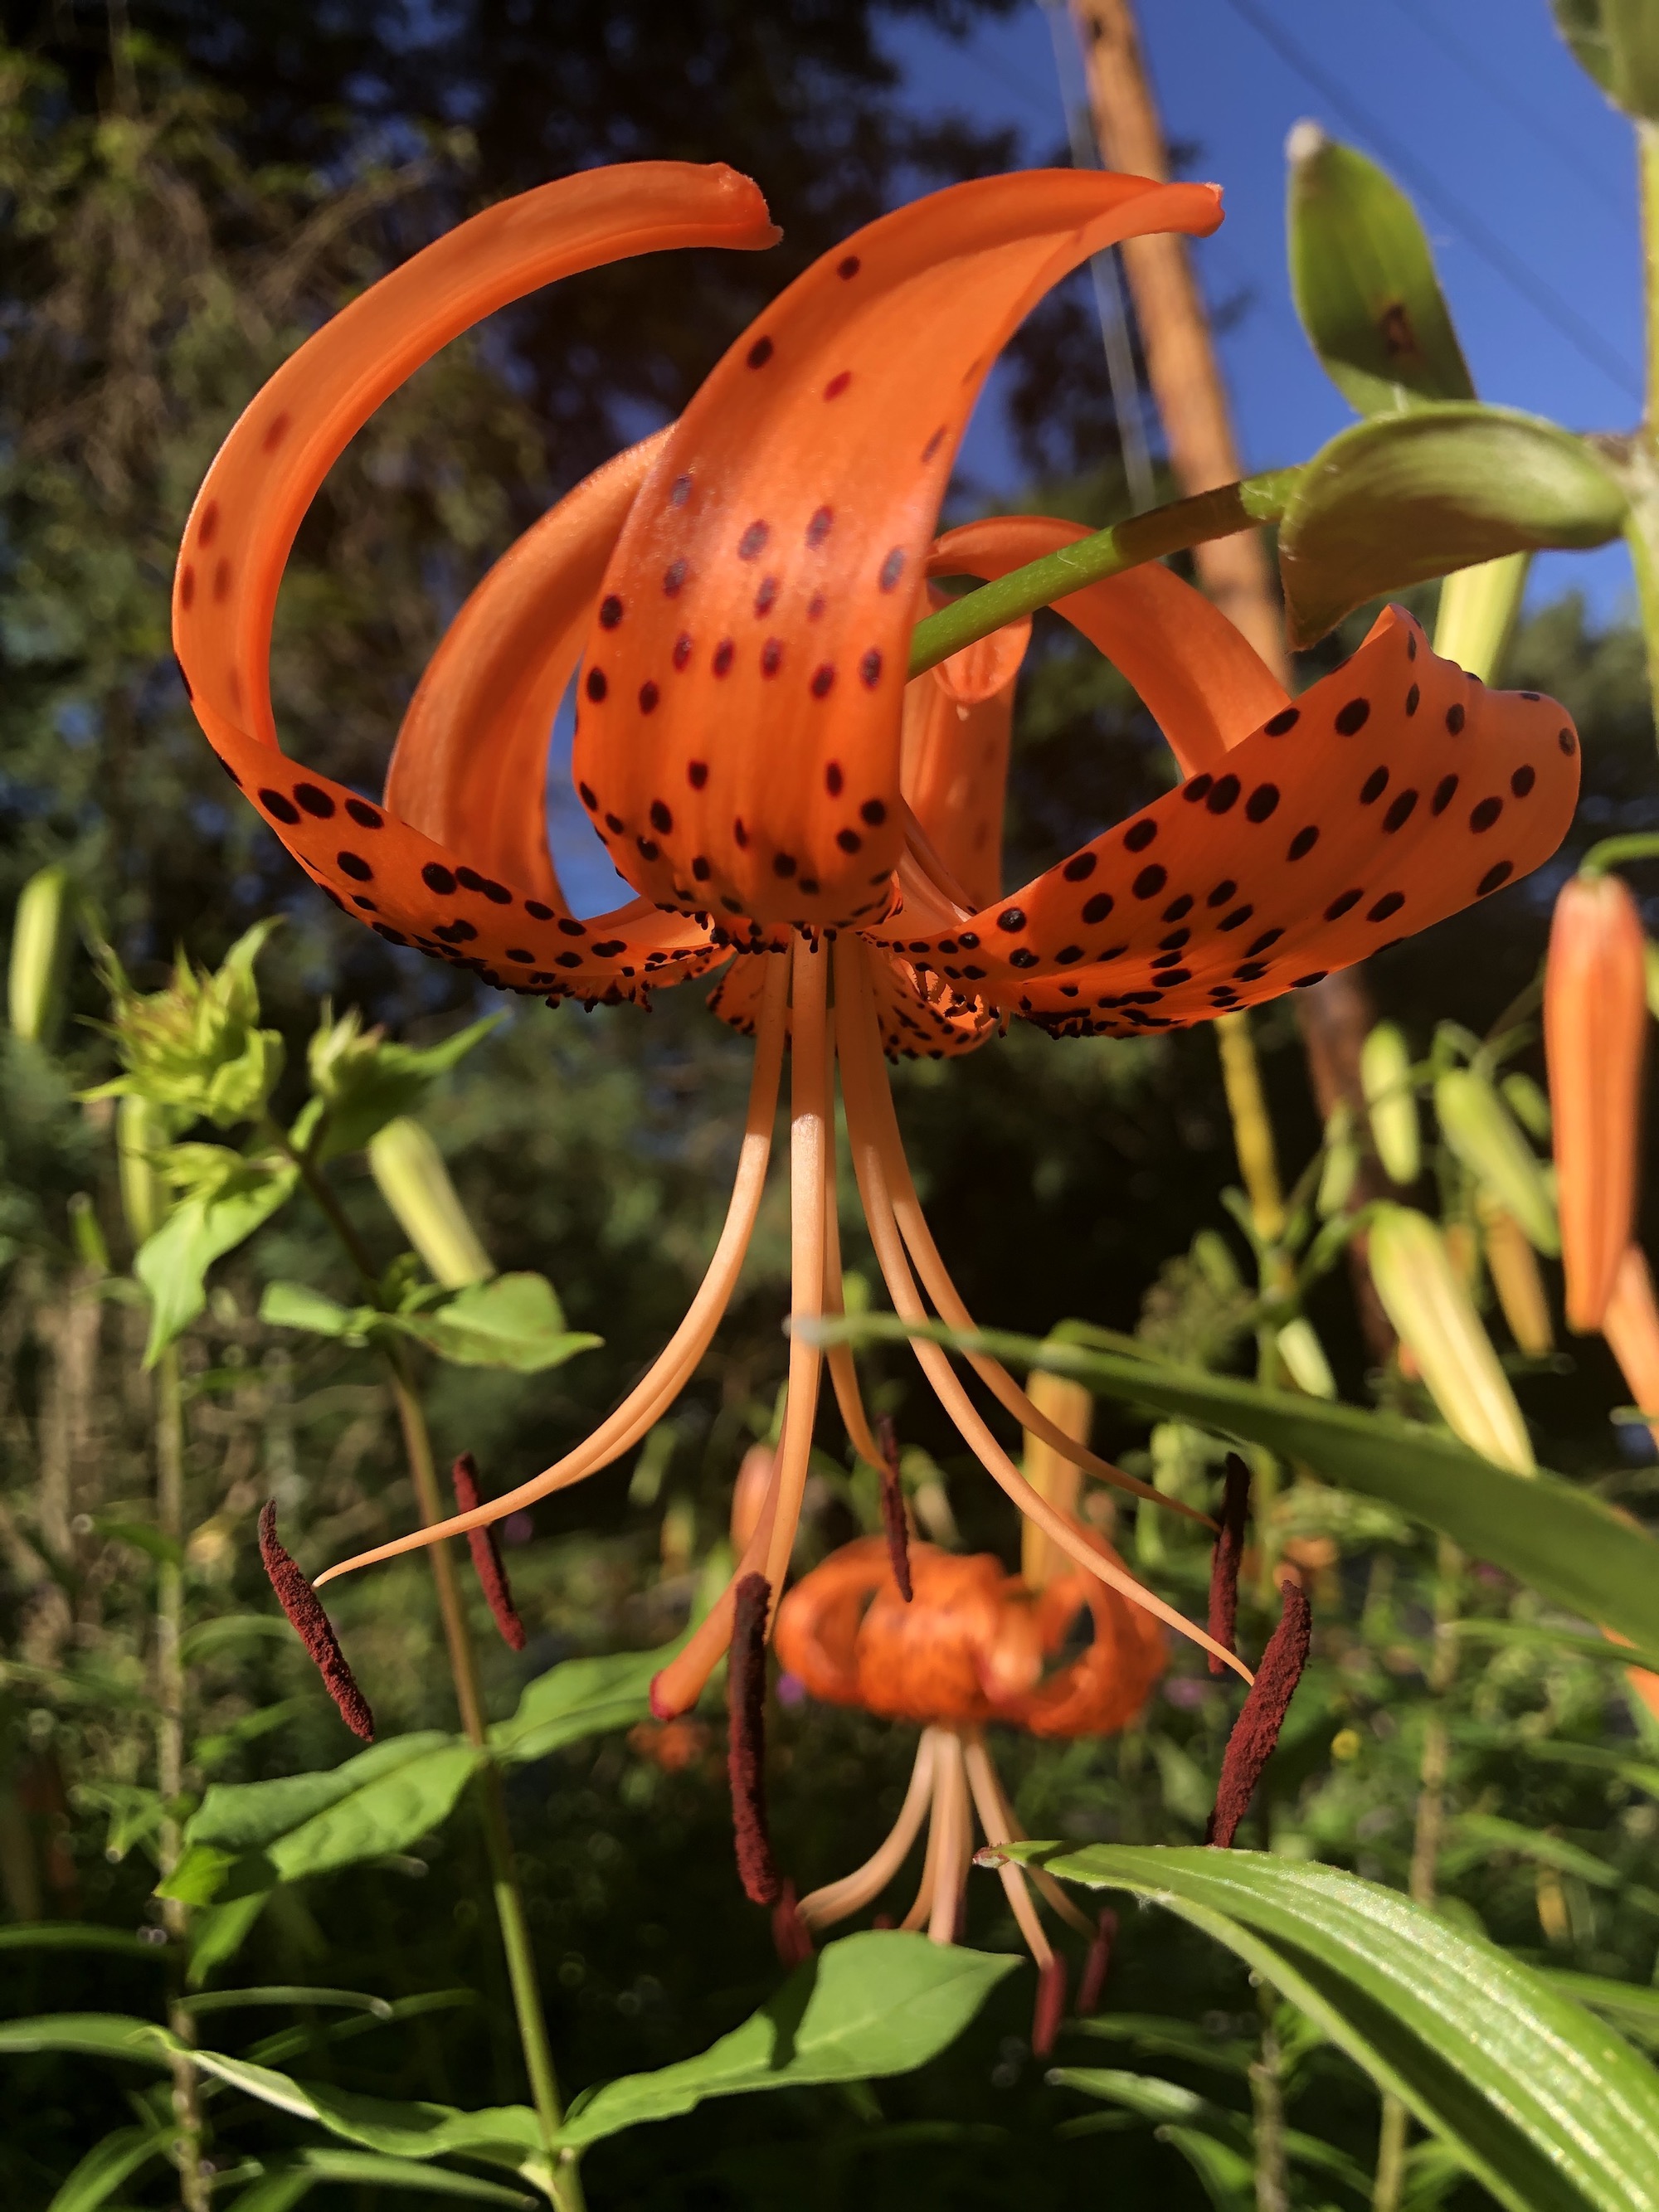 Tiger Lily near the Duck Pond on July 20, 2020.